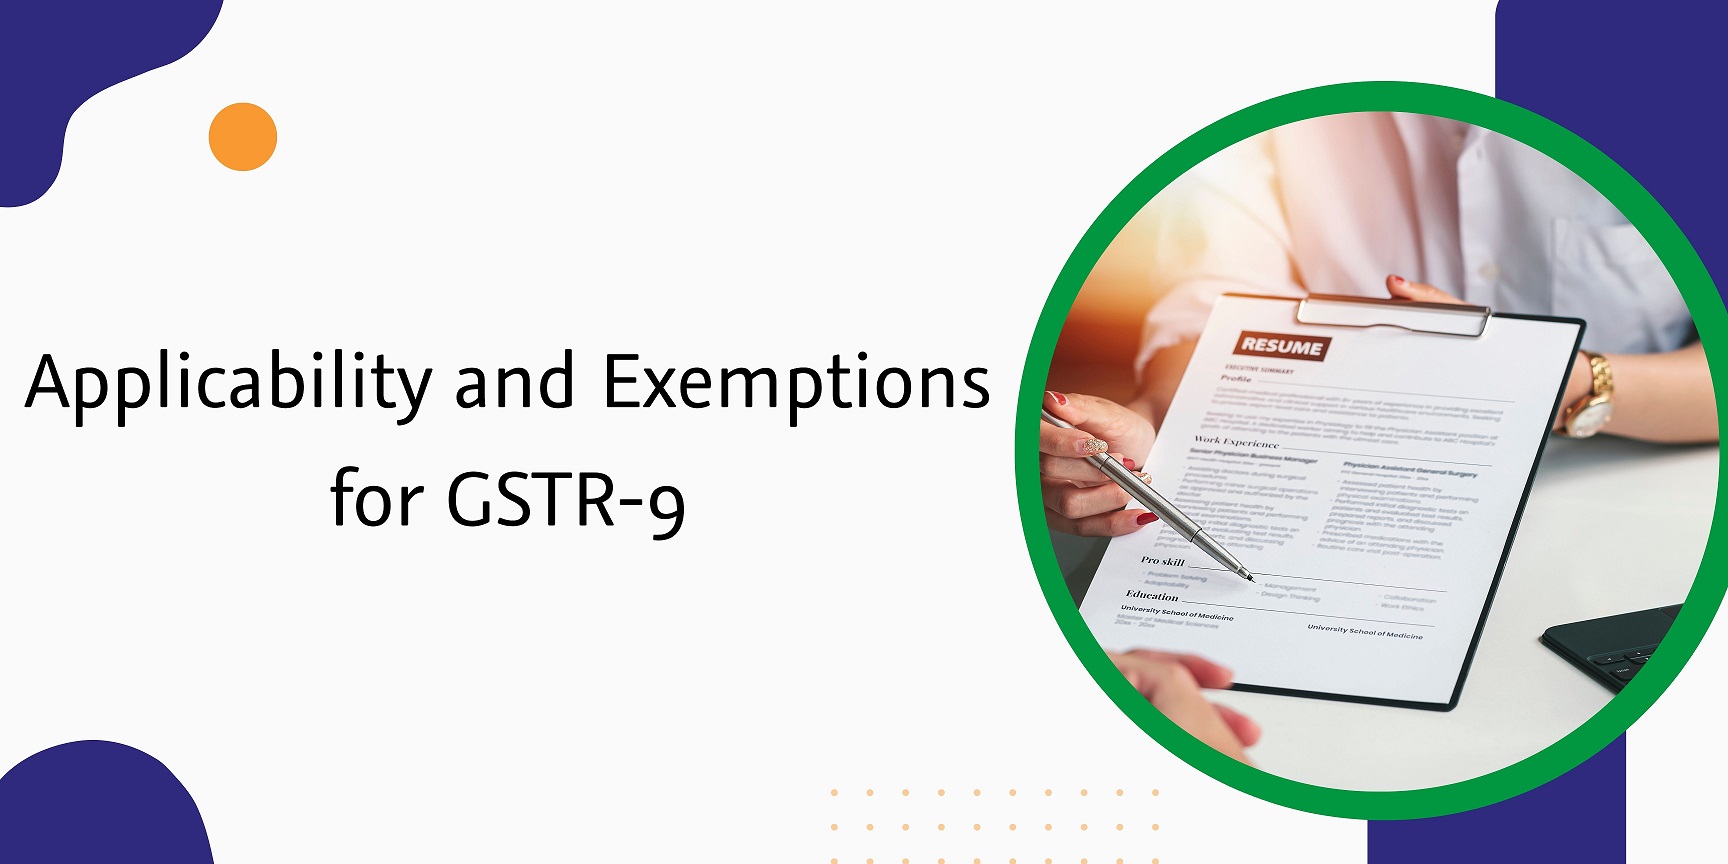 CaptainBiz: Applicability and exemptions for GSTR-9